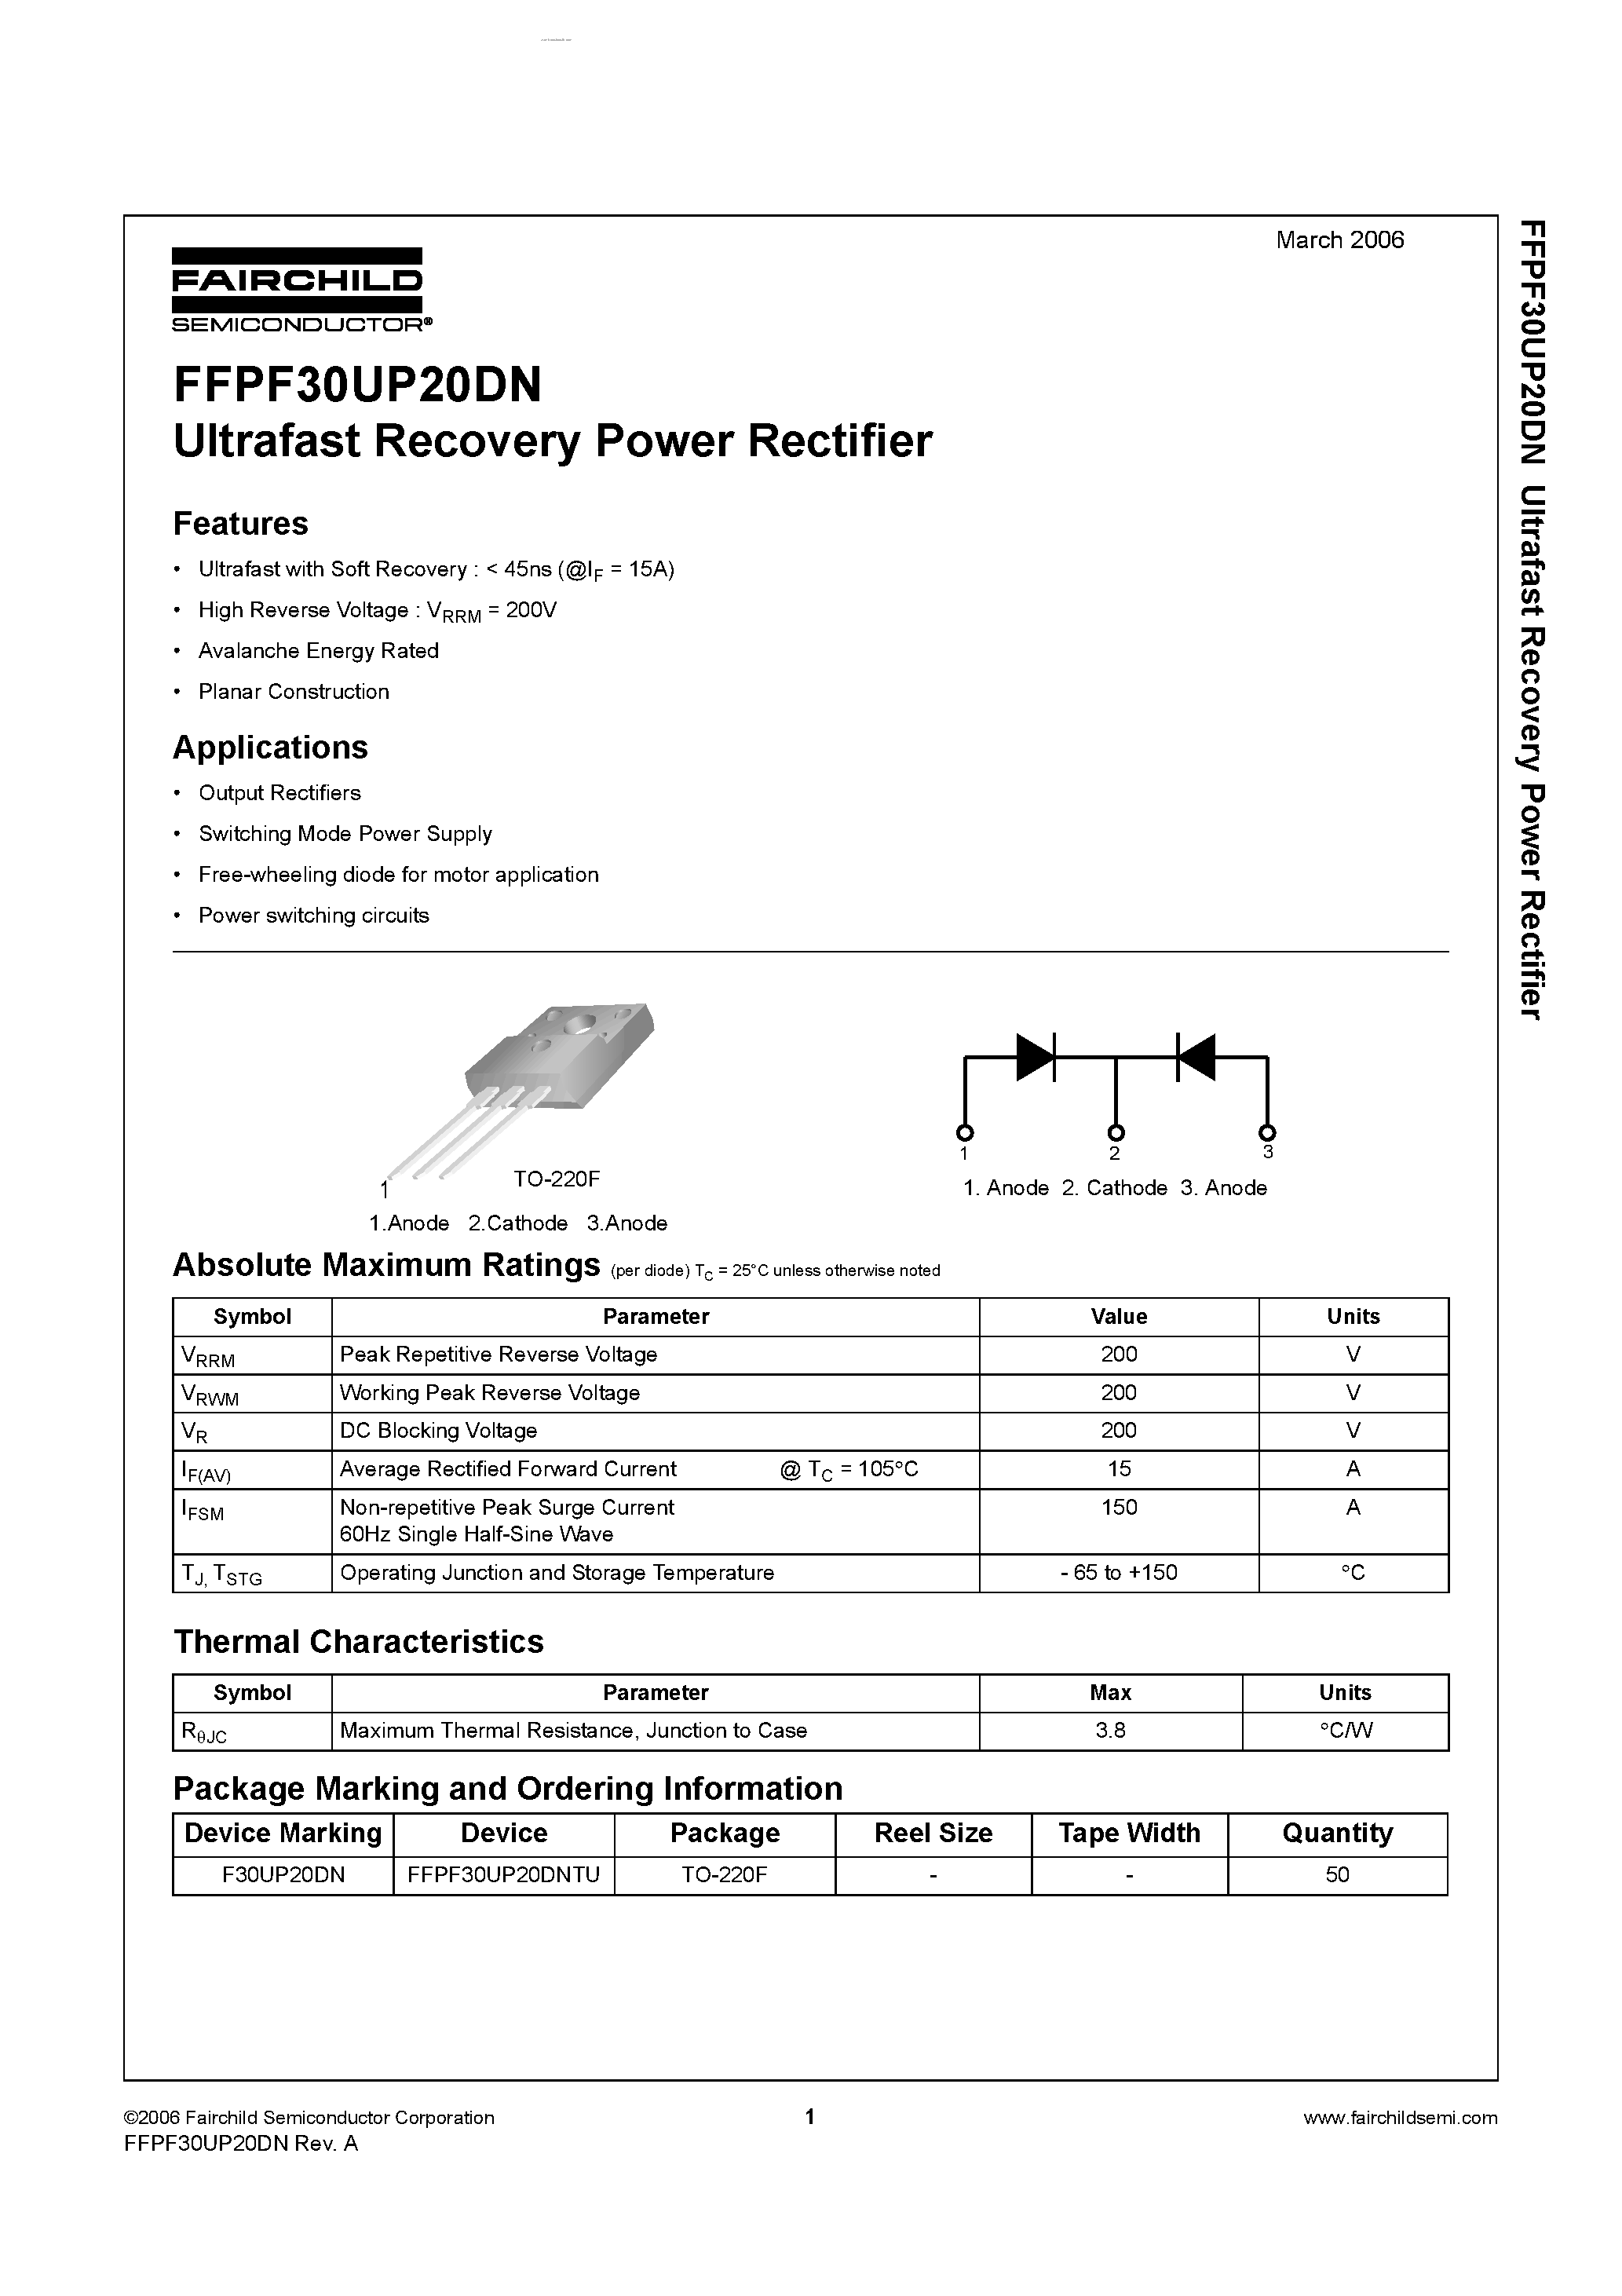 Datasheet FFPF30UP20DN - Ultrafast Recovery Power Rectifier page 1